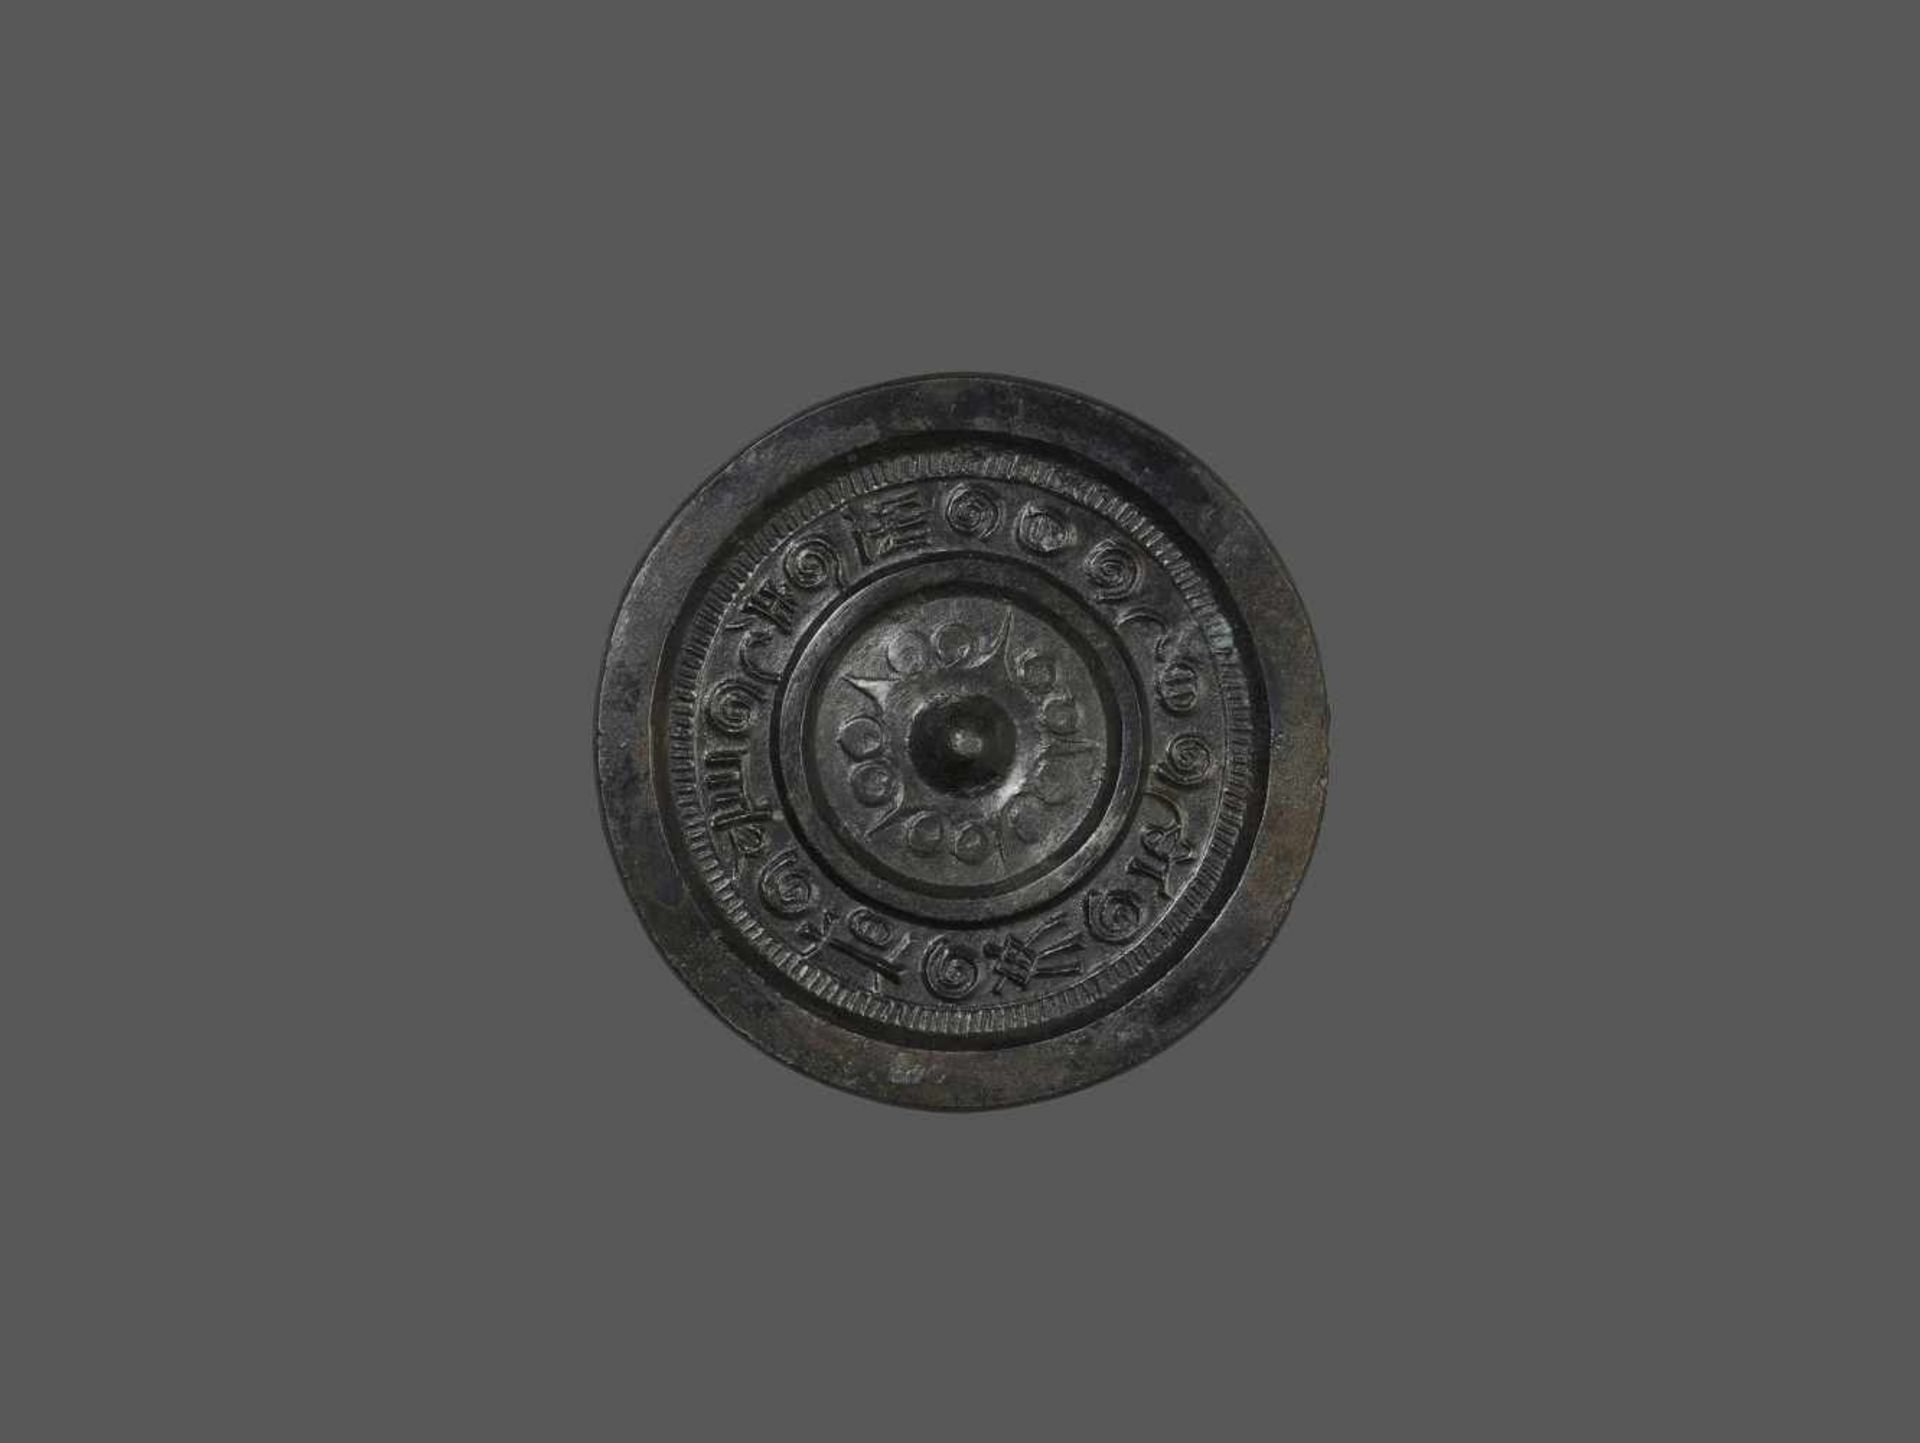 AN INSCRIBED BRONZE MIRROR China, 3rd – 4th century. The suspension knob surrounded by two